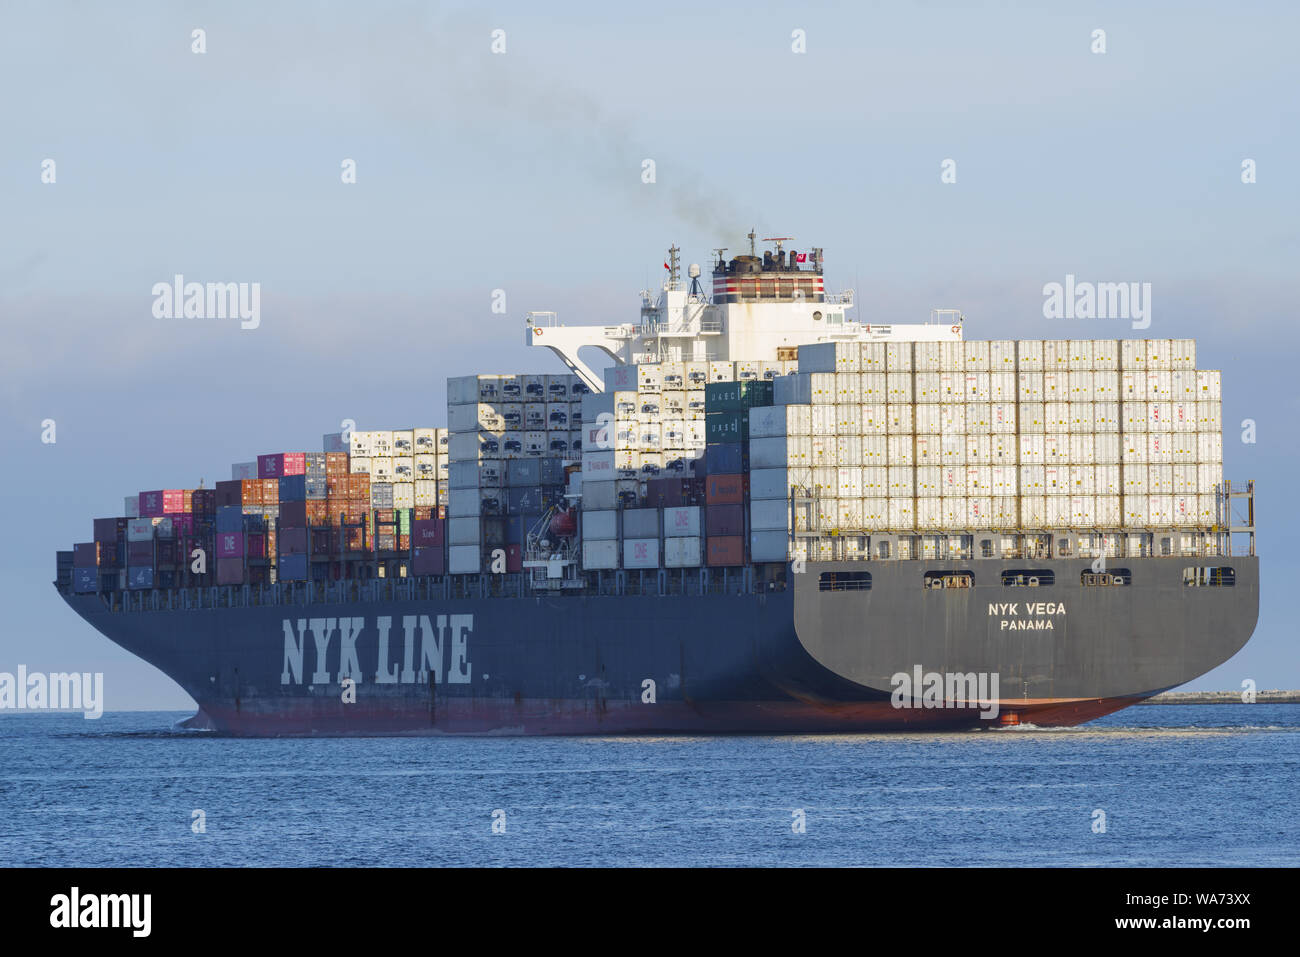 Image of a NYK Line container ship shown departing the Port of Los Angeles. Stock Photo